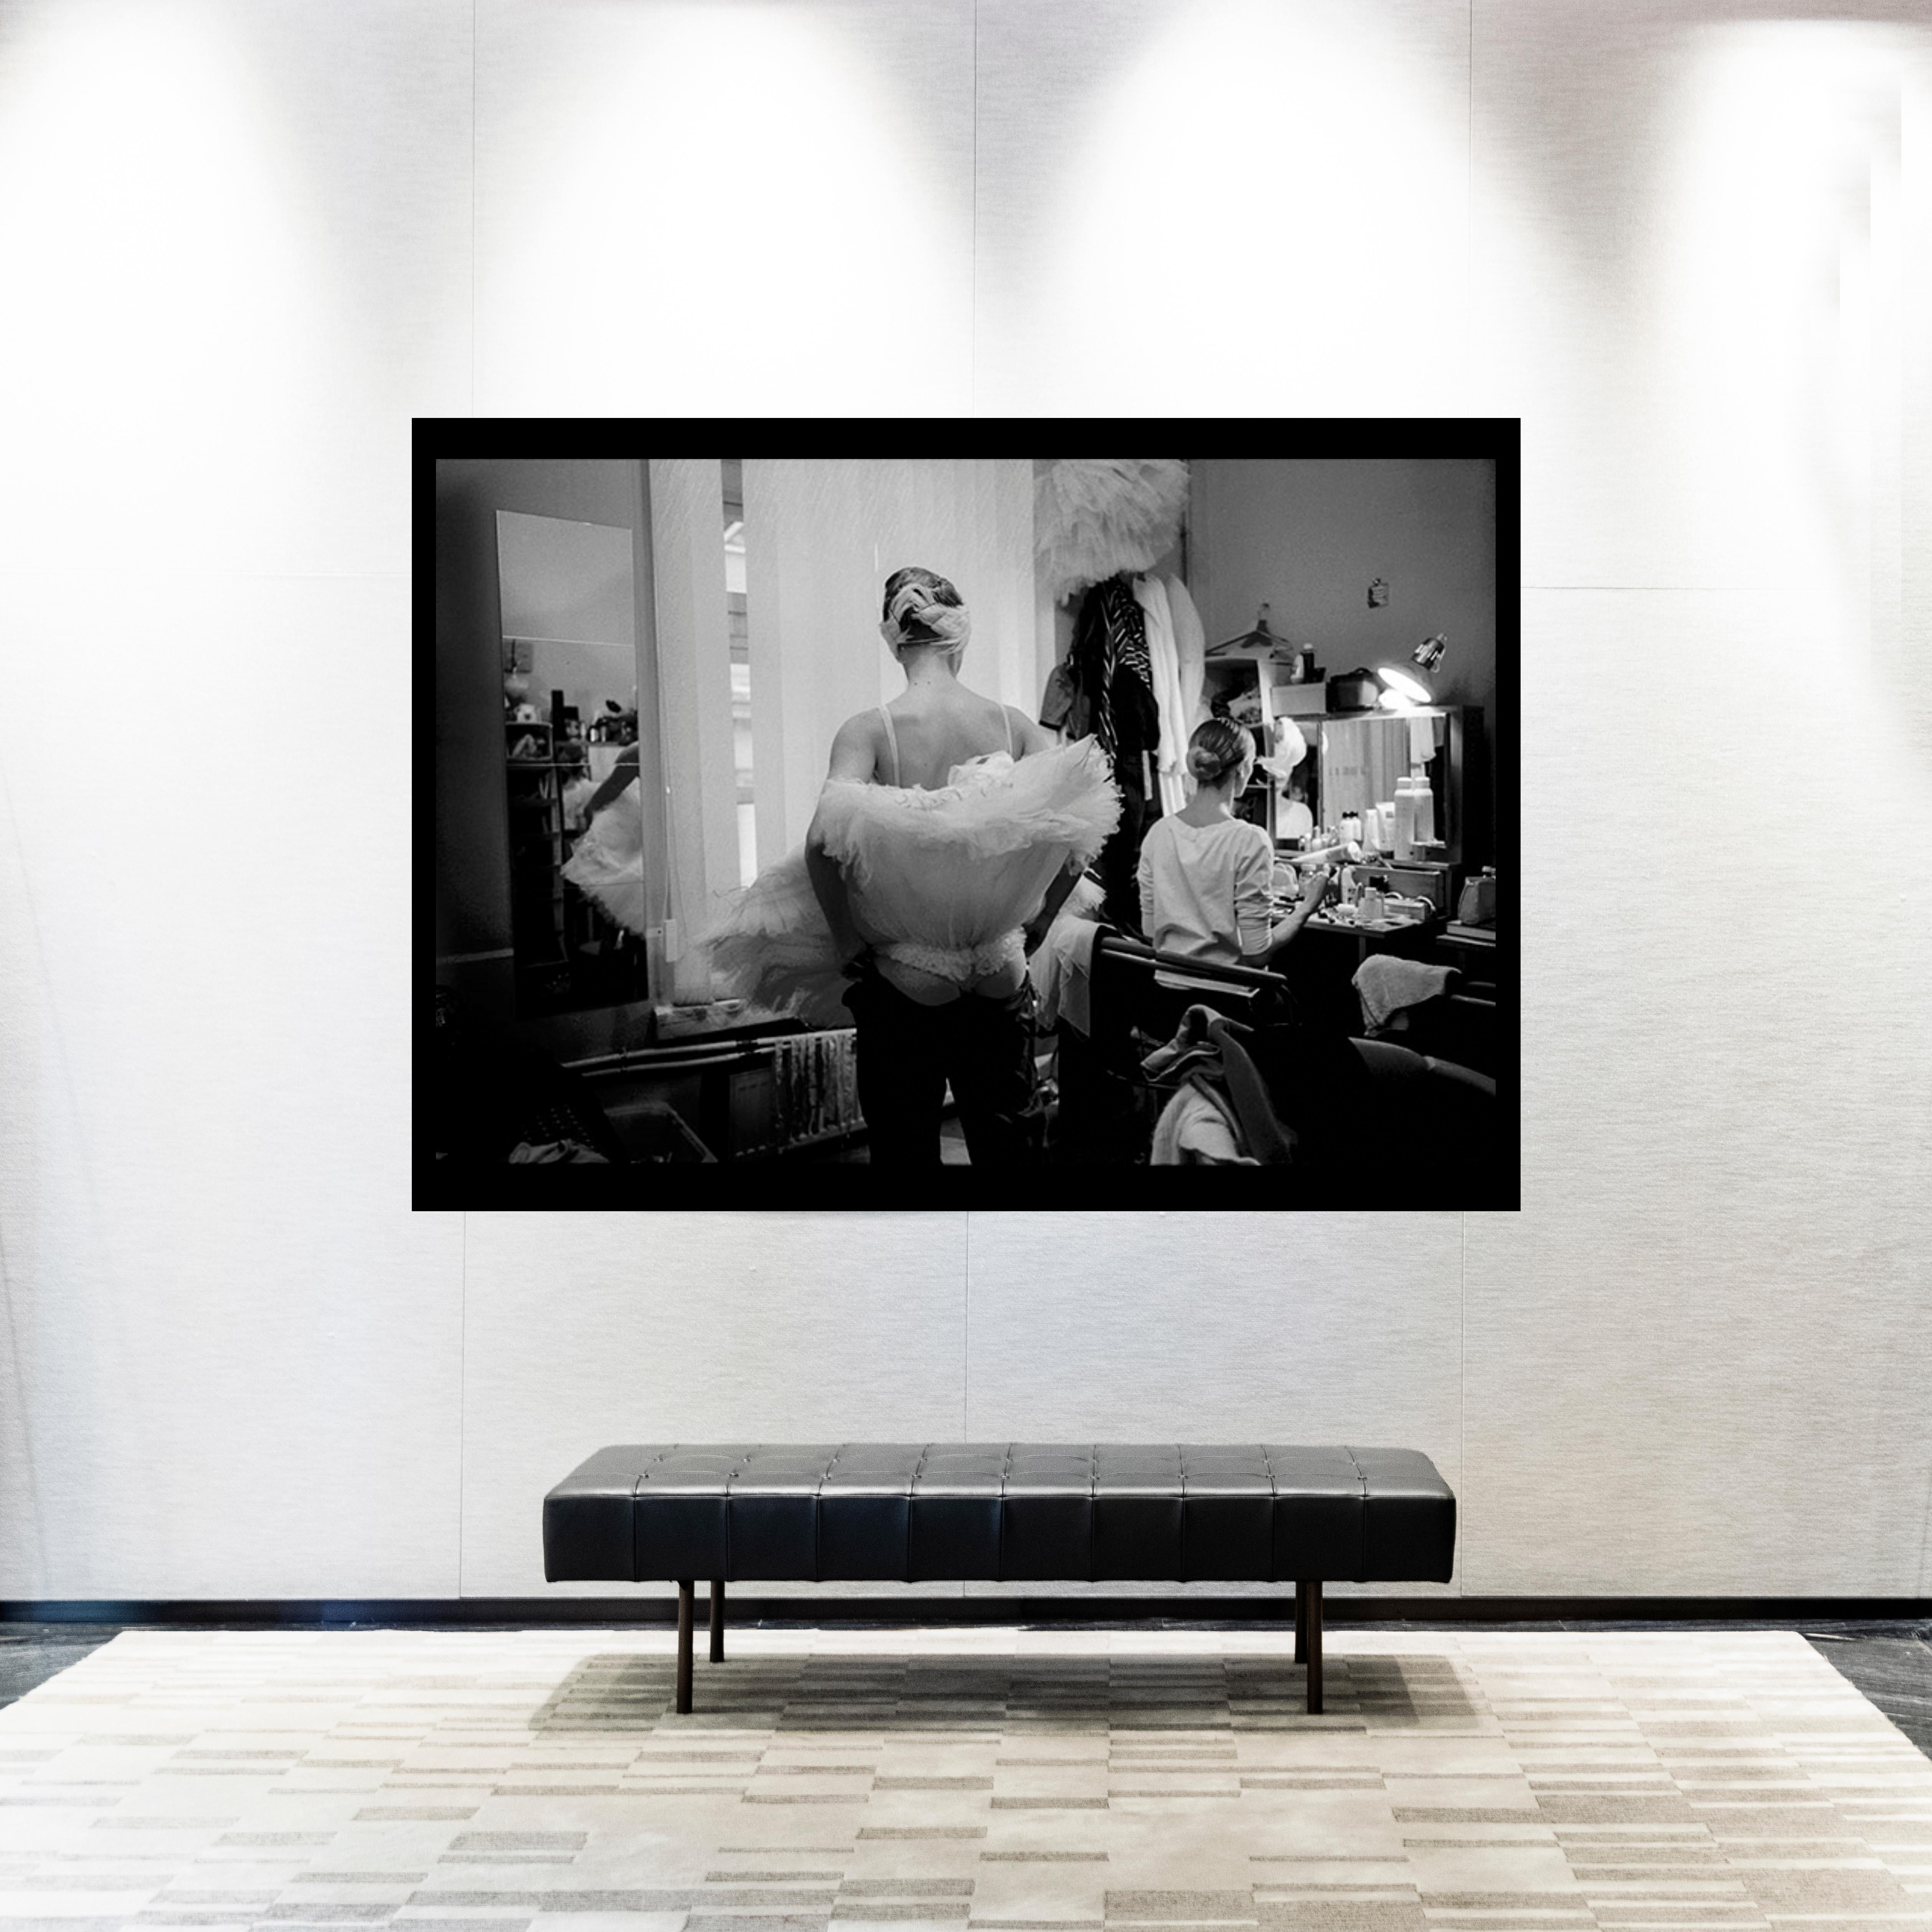 Prelude, The Dressing Room    47 in x 70 in (Black and White) - Photograph by Andrea Santoloya